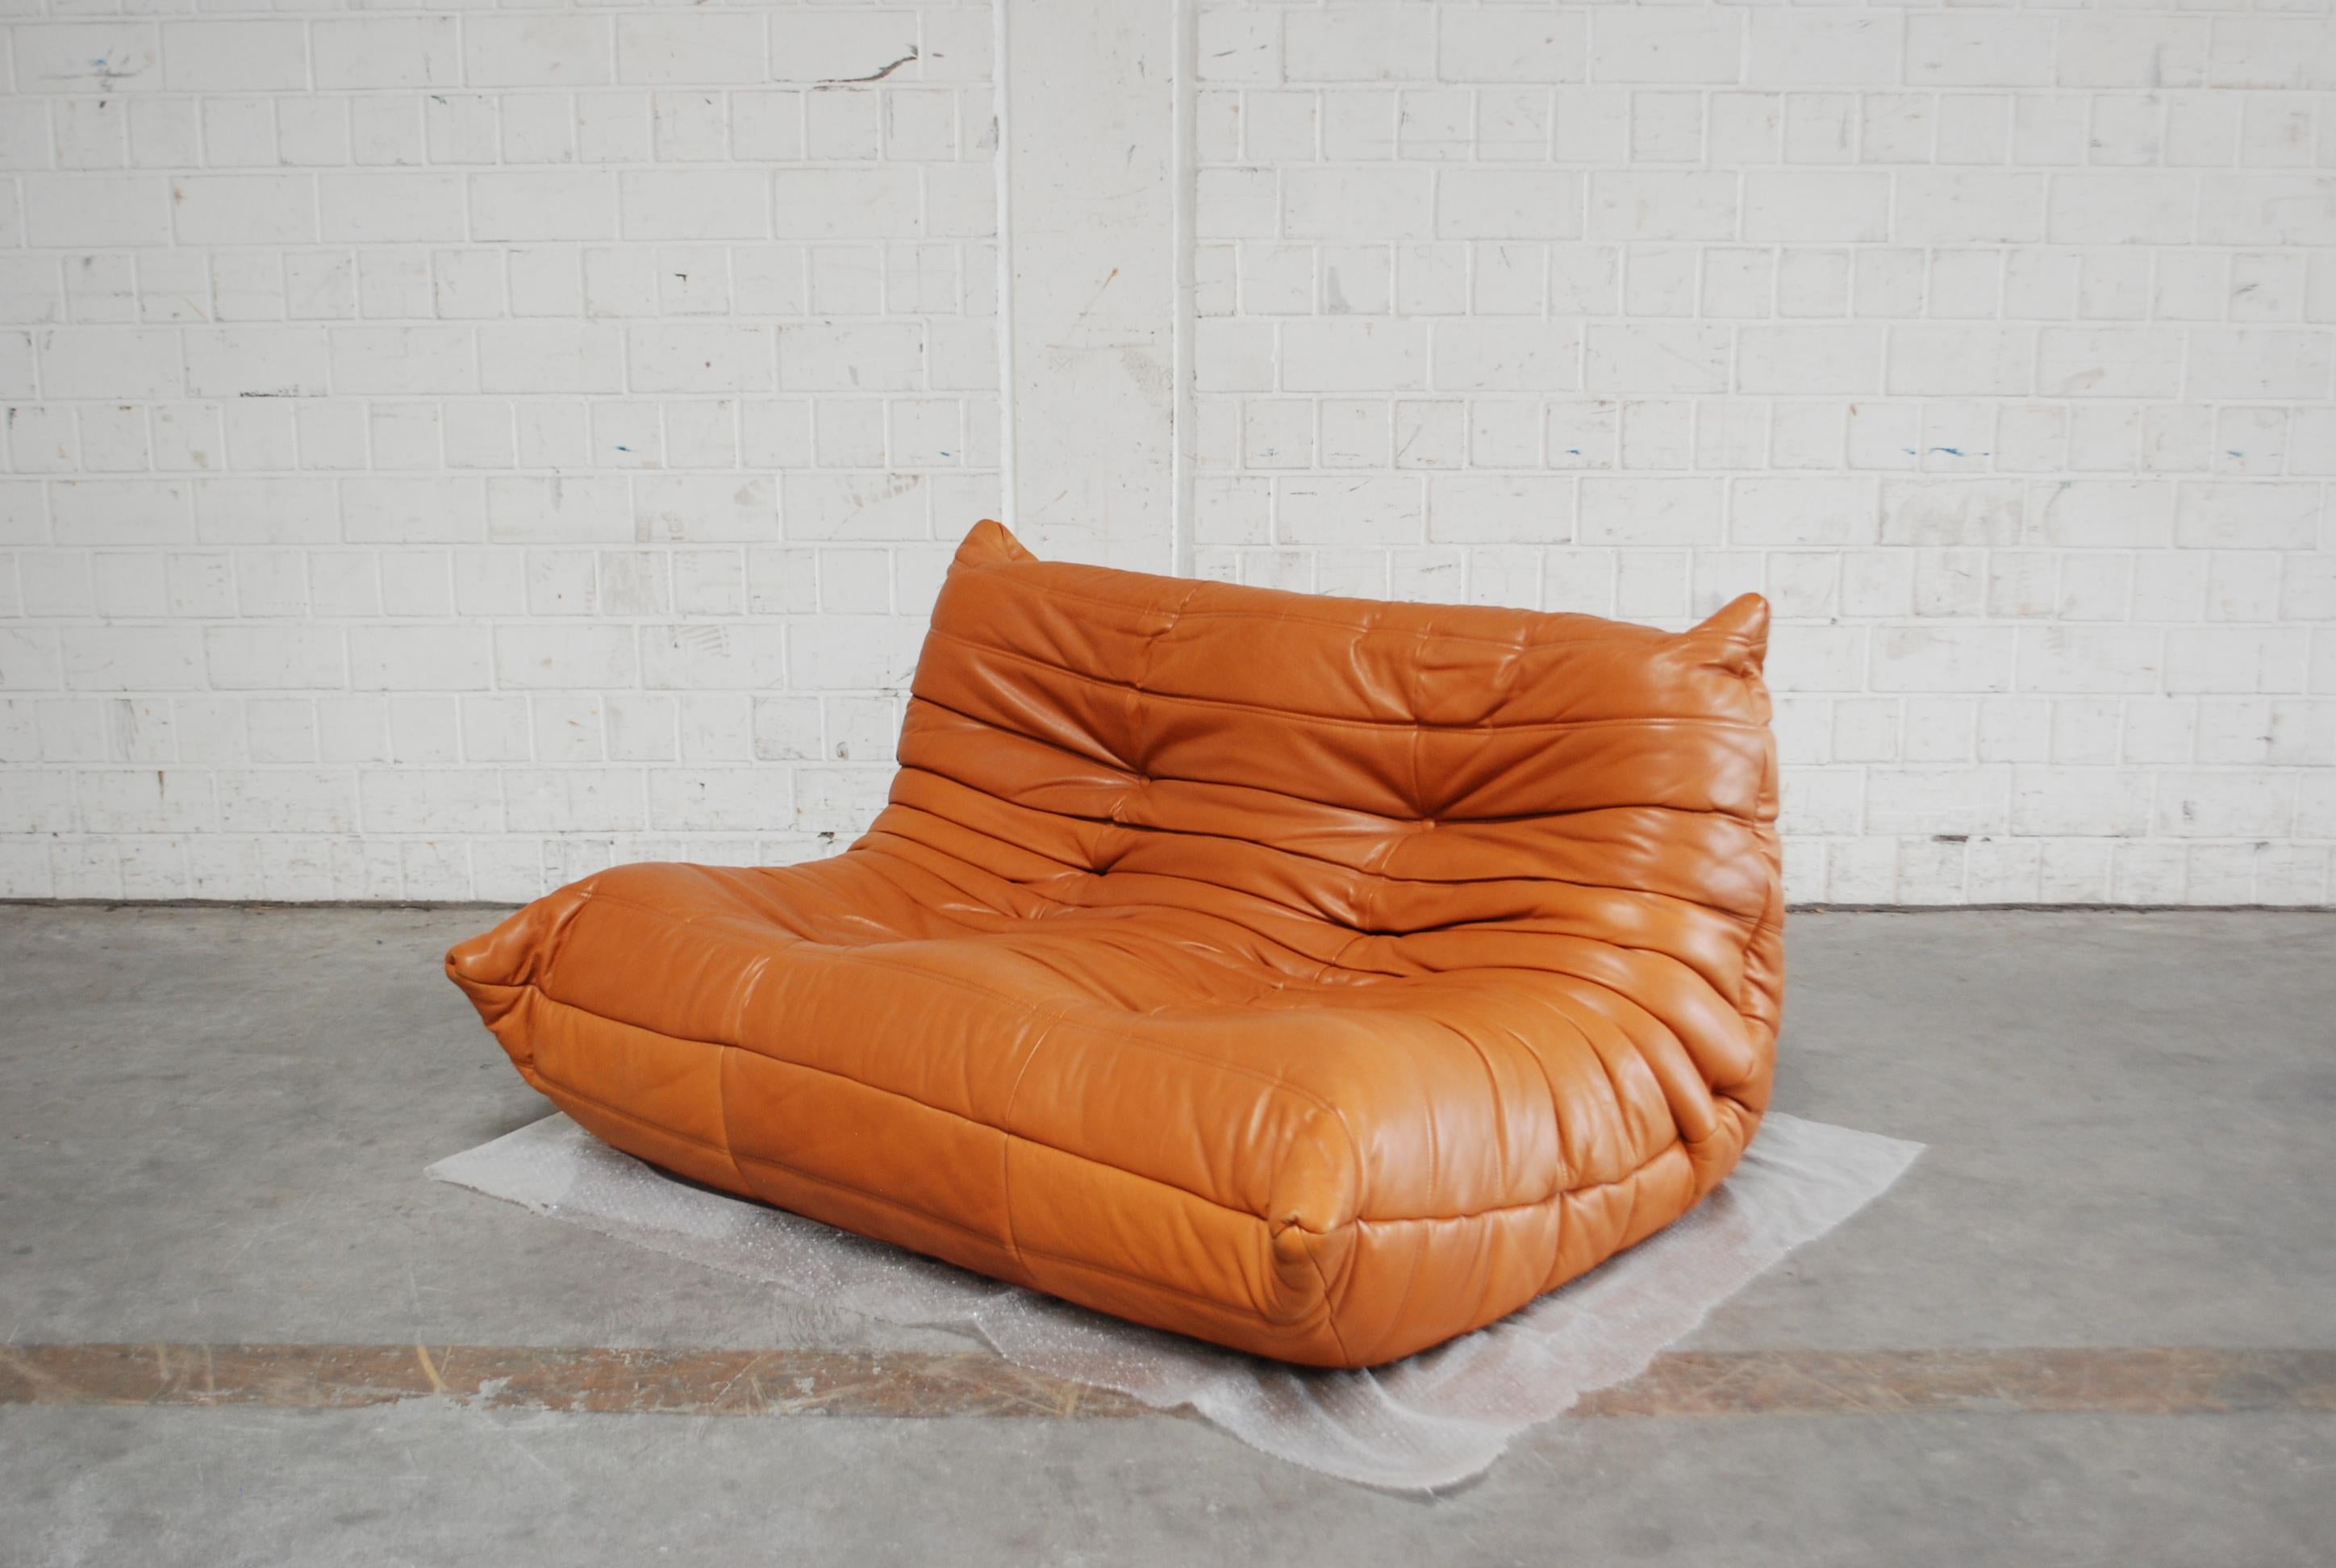 Ligne Roset Model Togo sofa in cognac brandy soft premium aniline leather.
Design by Michel Ducaroy.
Original leather with a soft touch.
From the late 1980s.
In a great condition. Hard to find this beautiful leather in this condition.
 